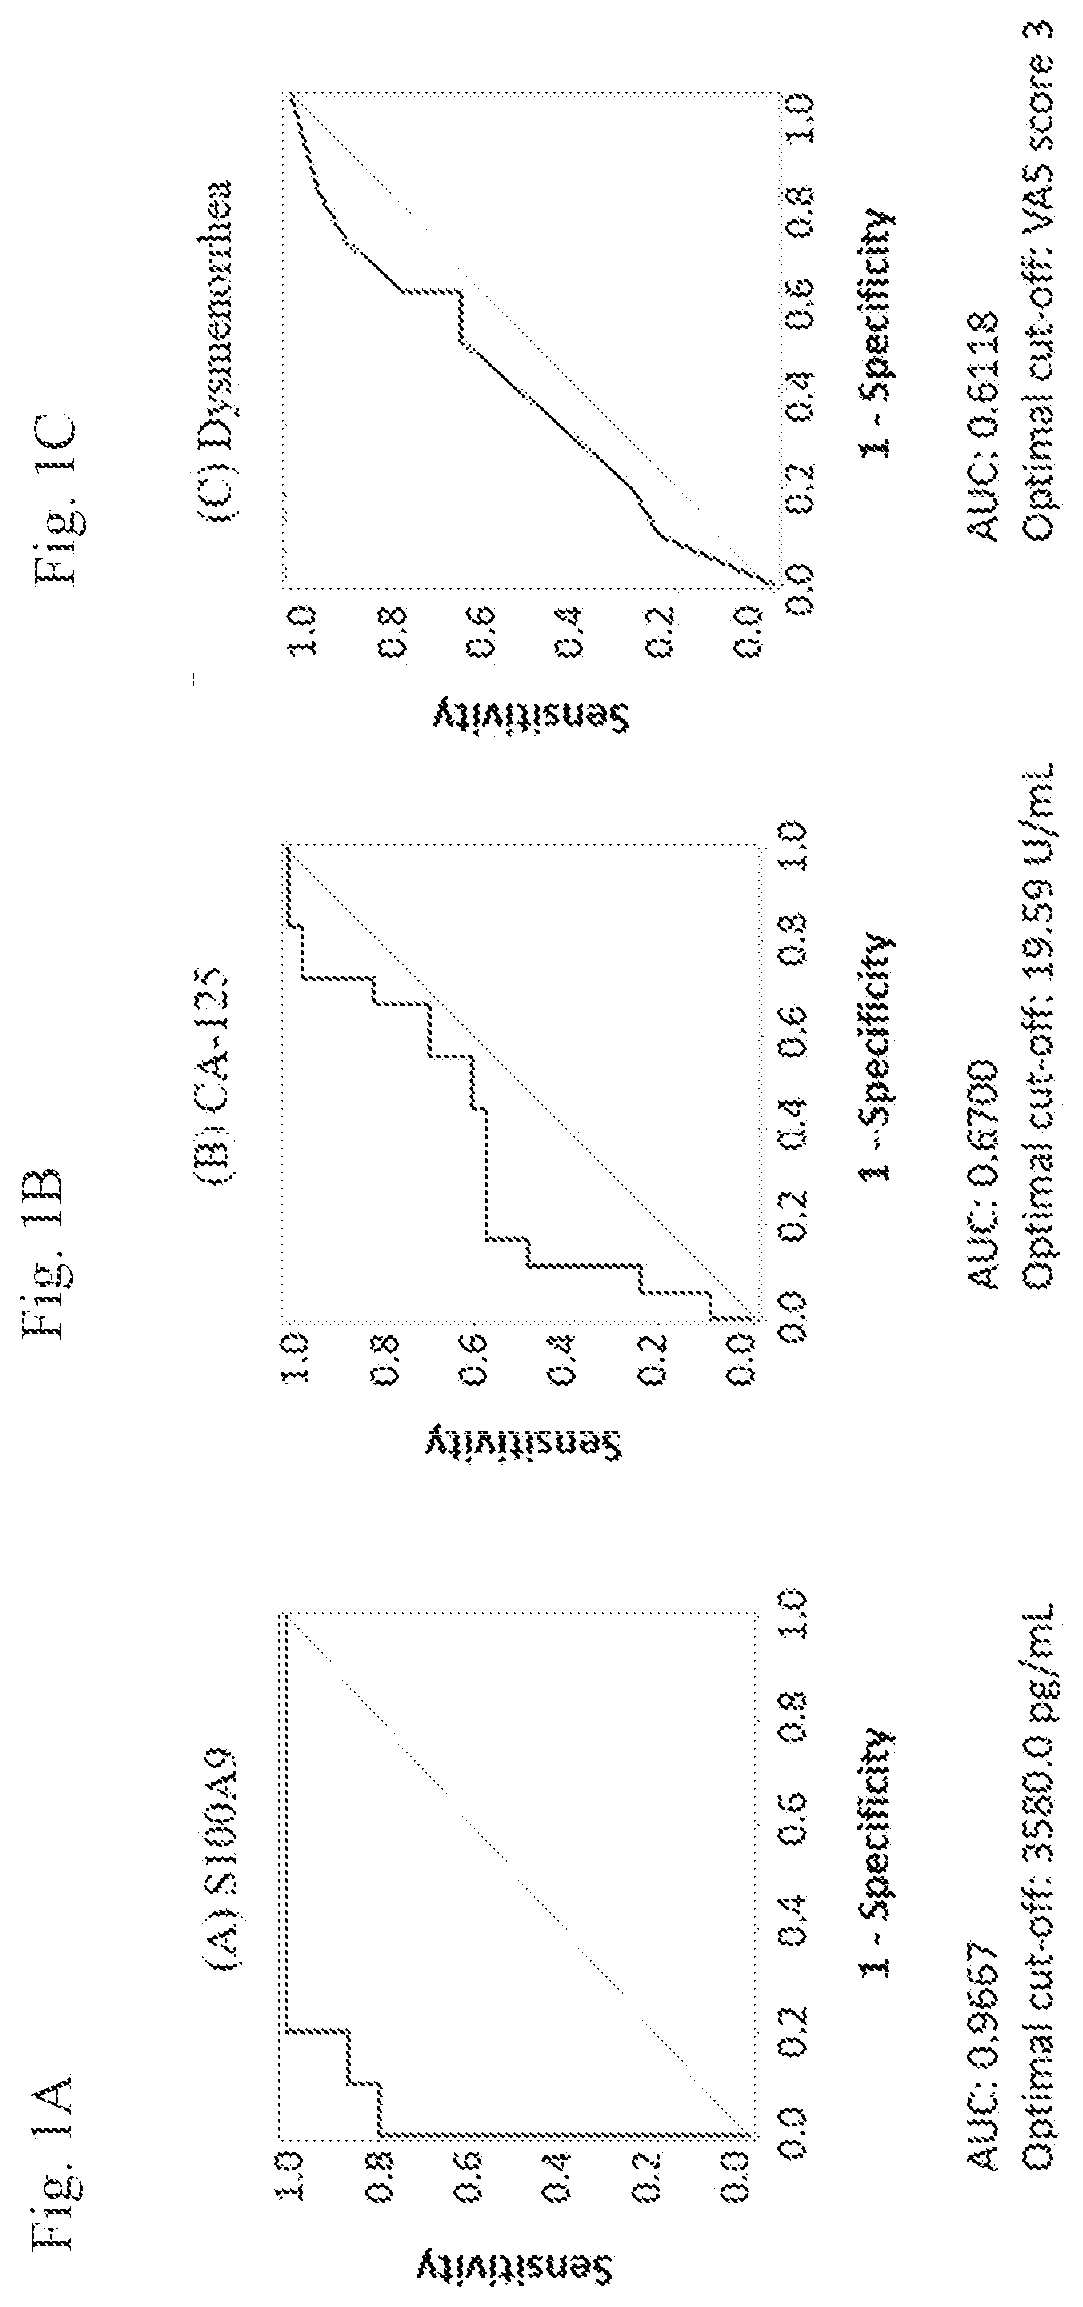 S100a9 as blood biomarker for the non-invasive diagnosis of endometriosis